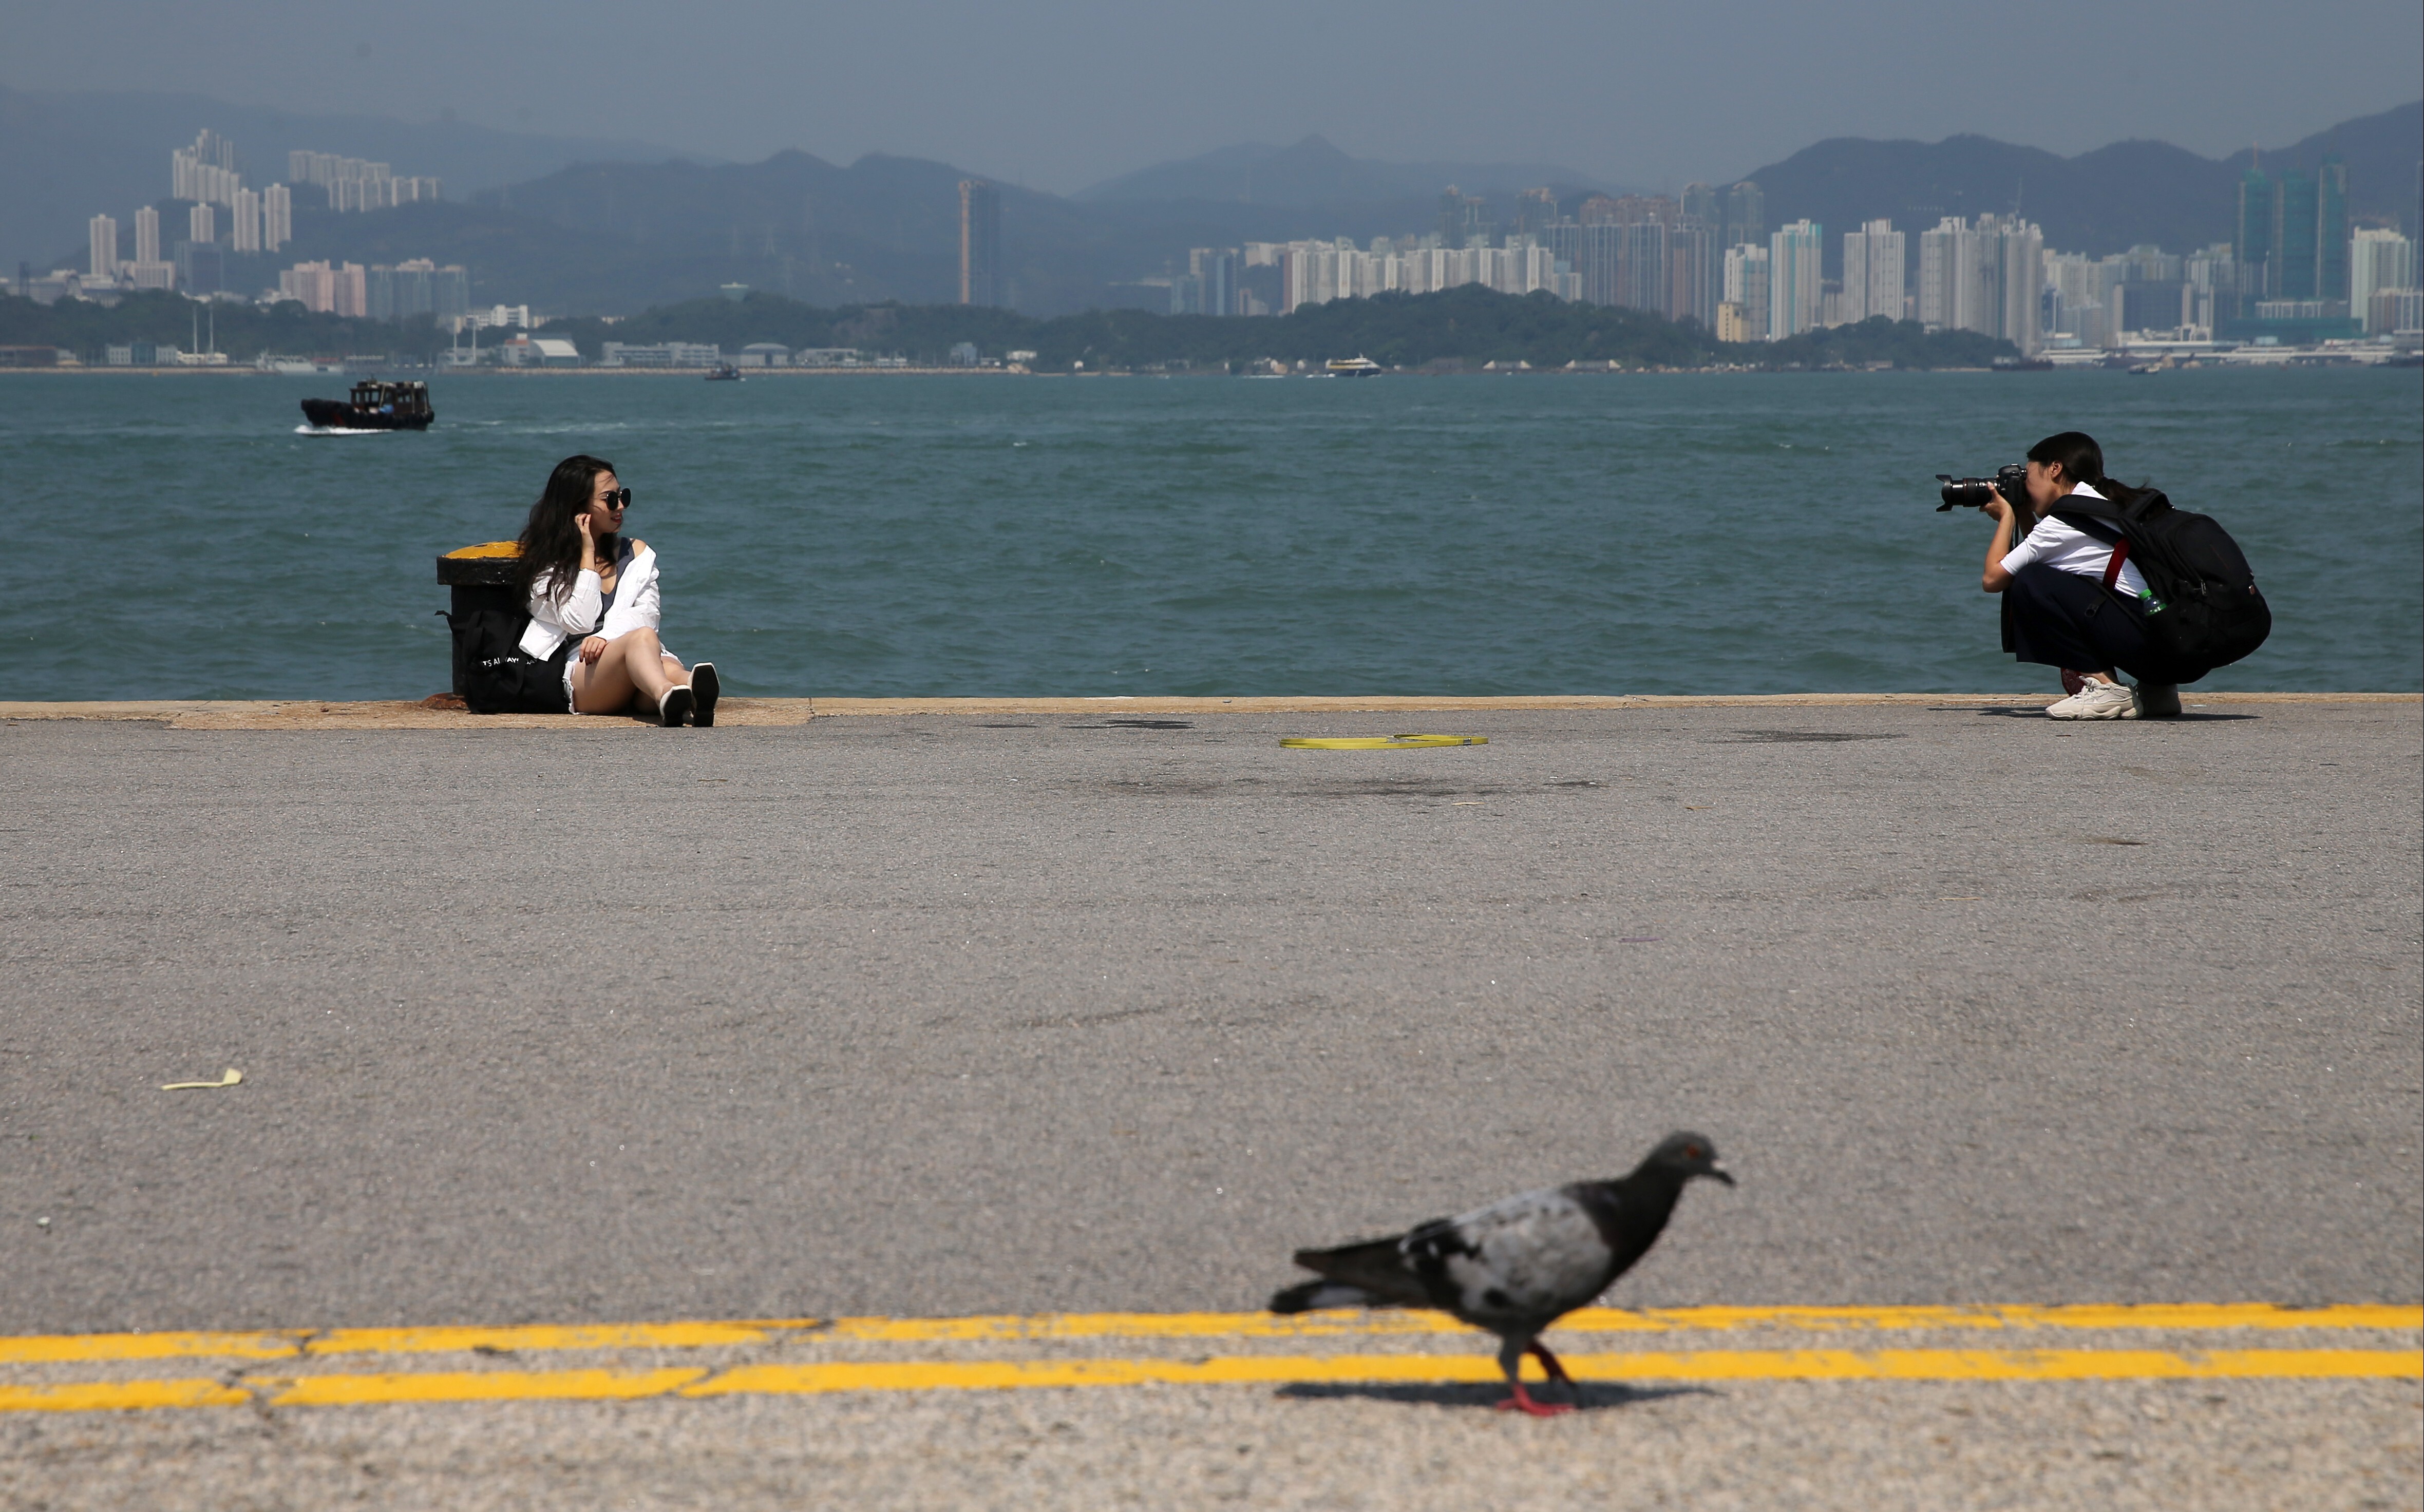 Instagram Pier is a popular site for taking photographs among locals and tourists alike. Photo: Sam Tsang